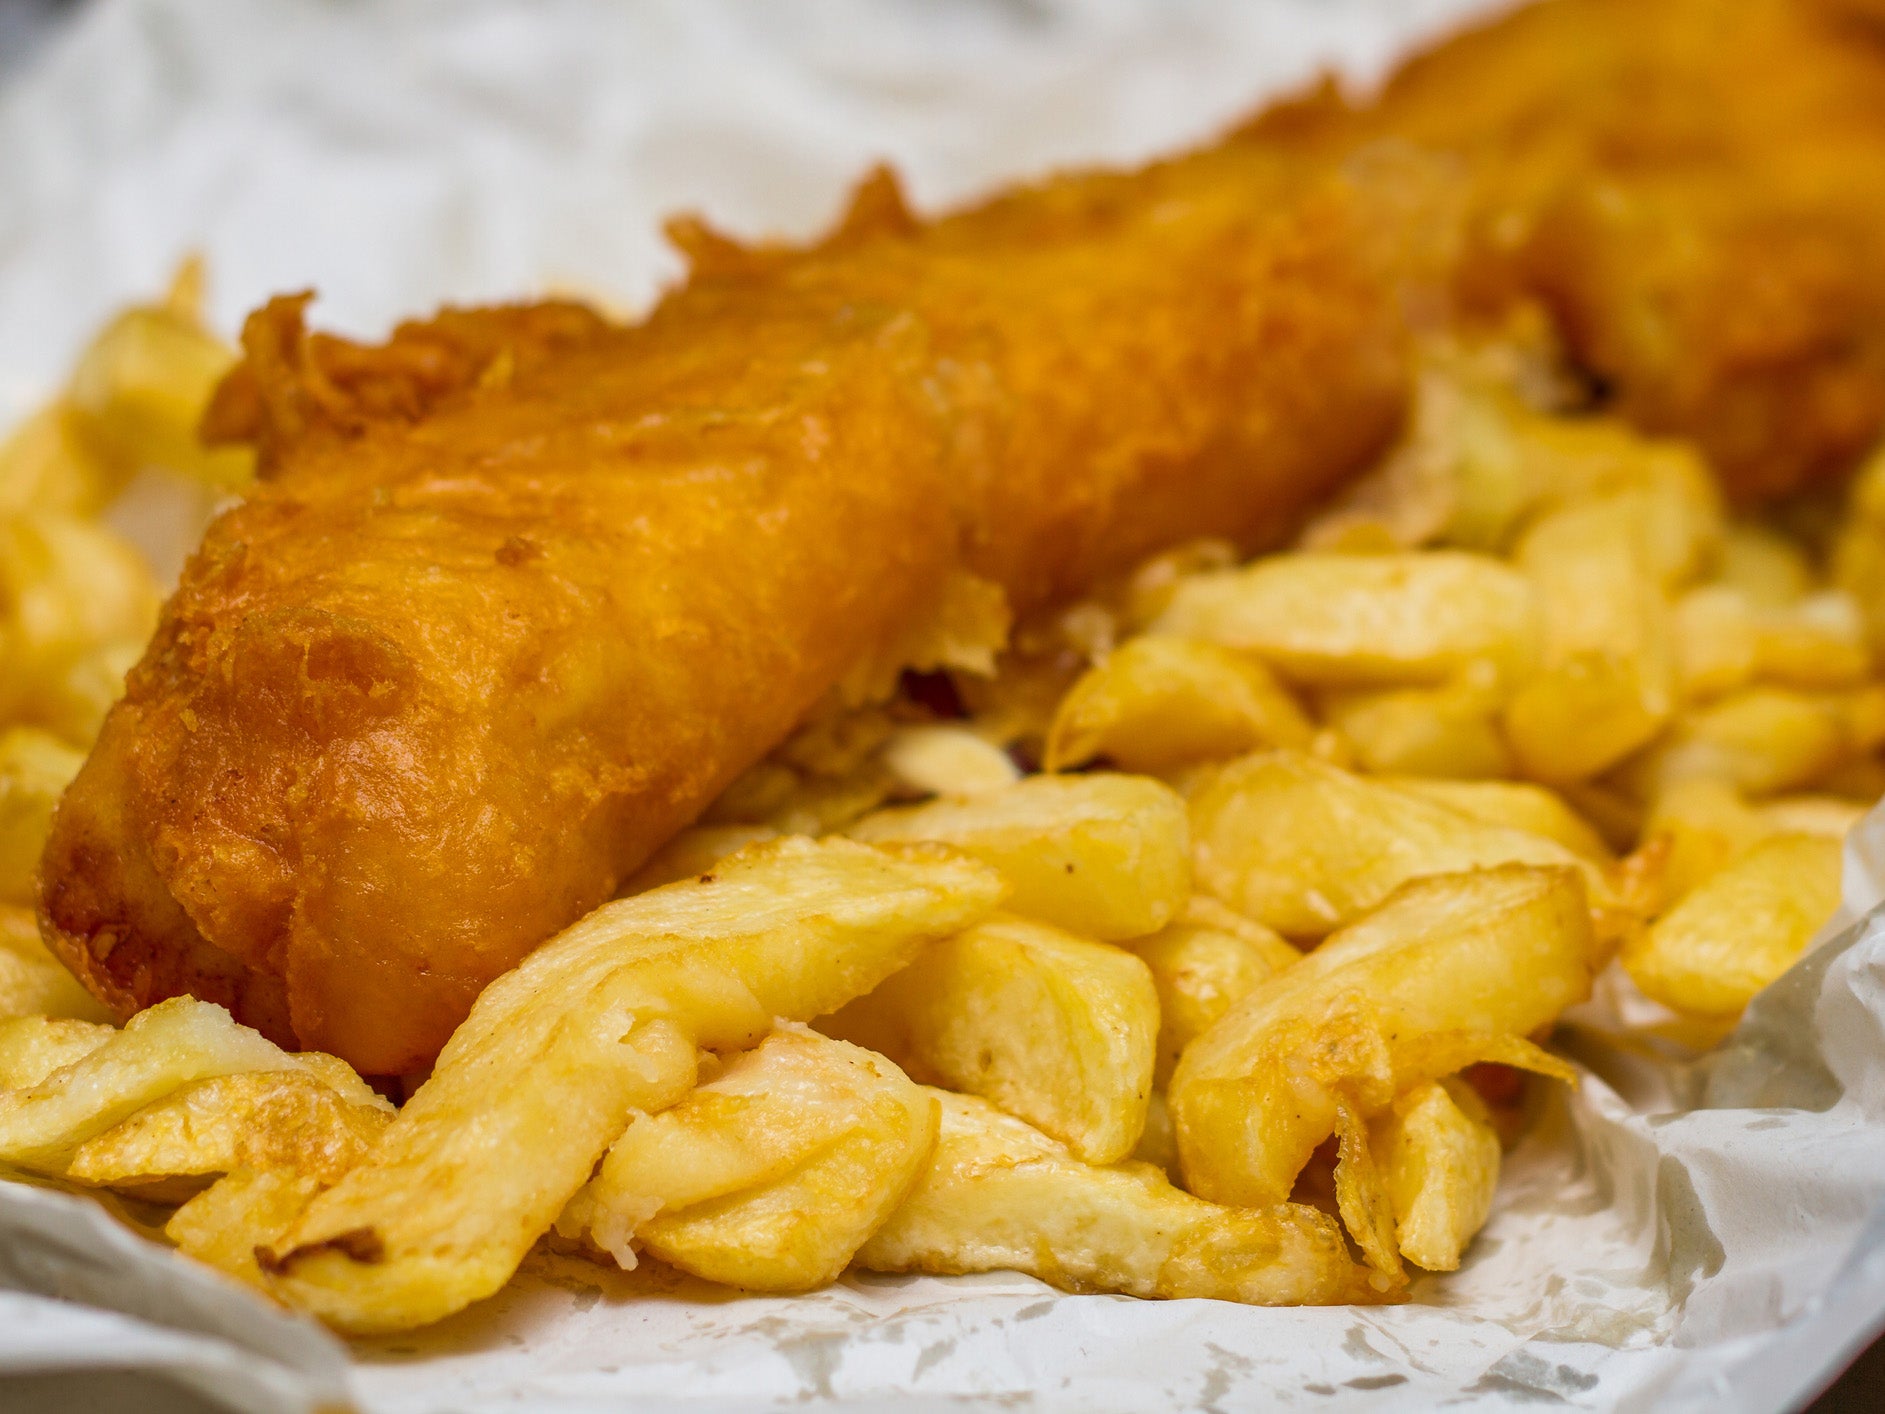 fish and chips near me open sunday